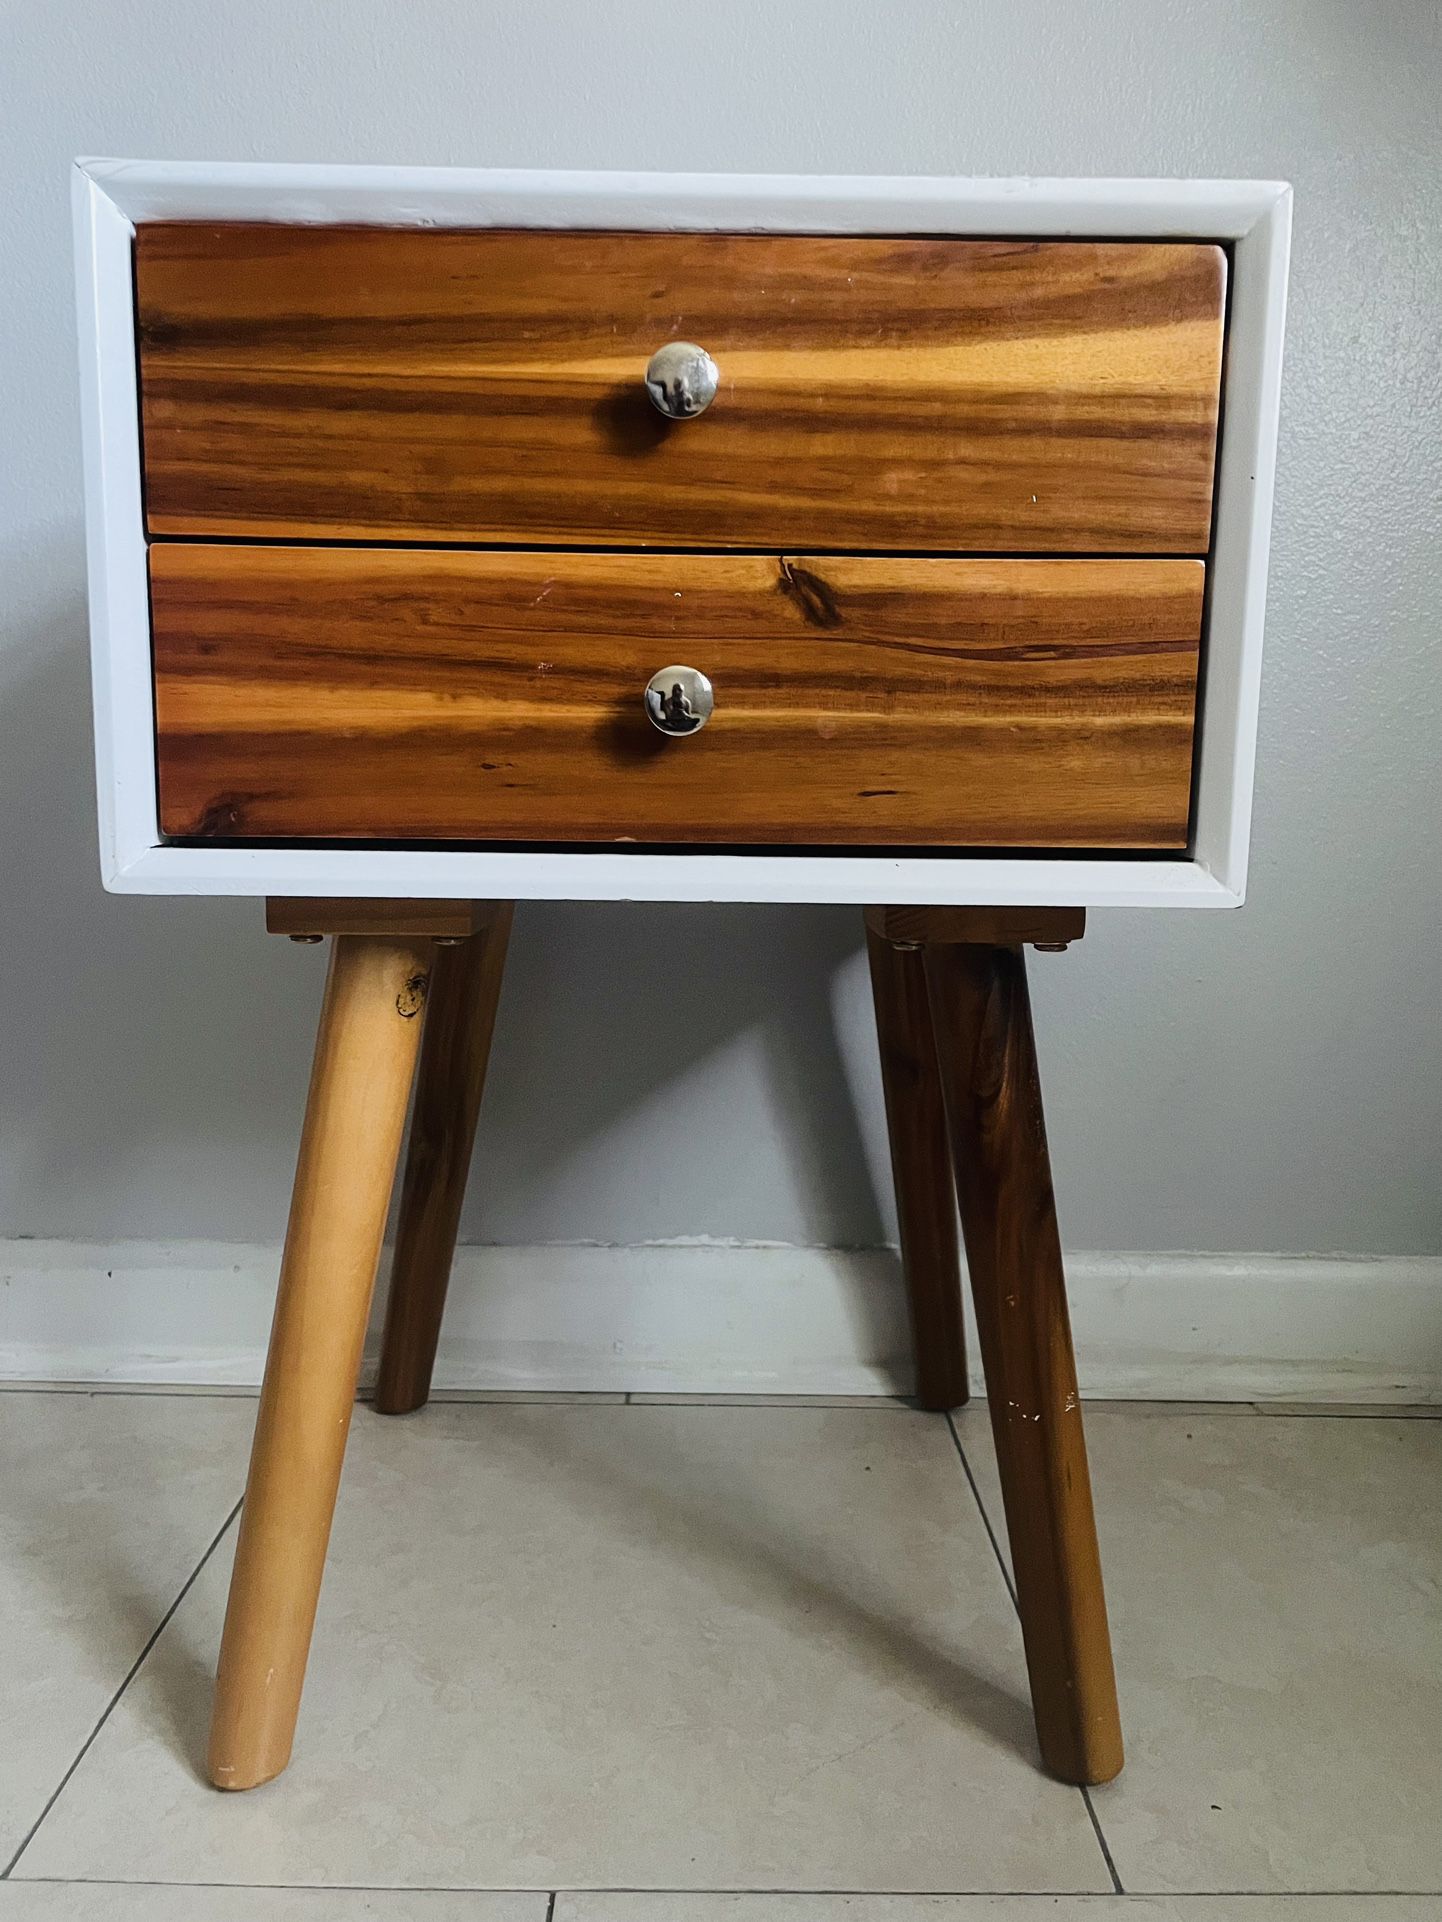 One 2-drawer Nightstand Multifunctional Bedside Modern Storage Table Wooden $35